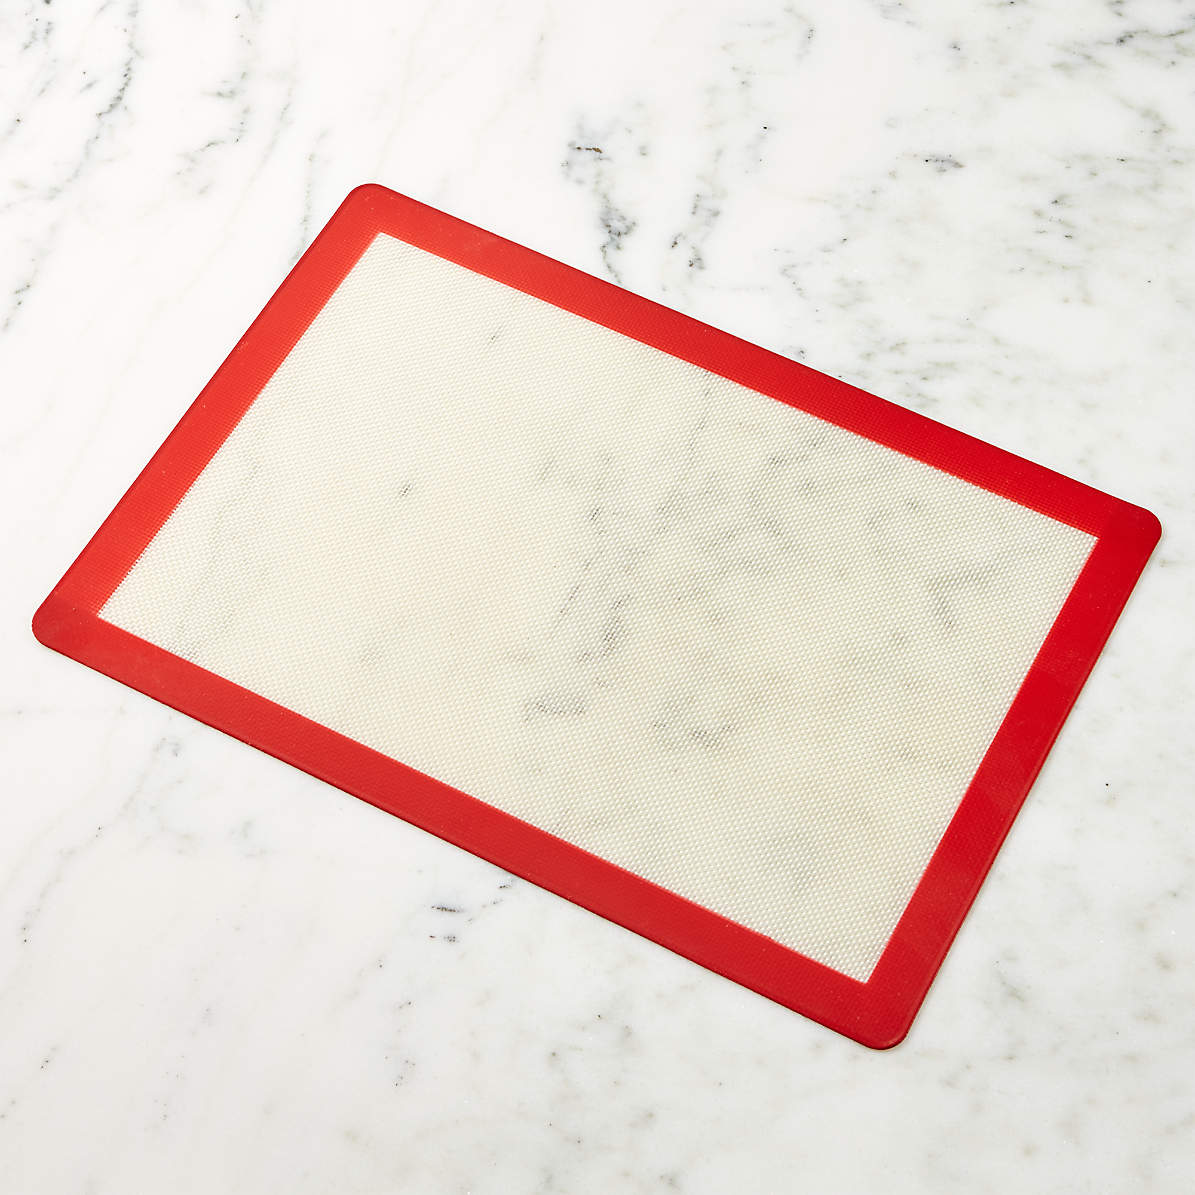 how to use silicone baking mat